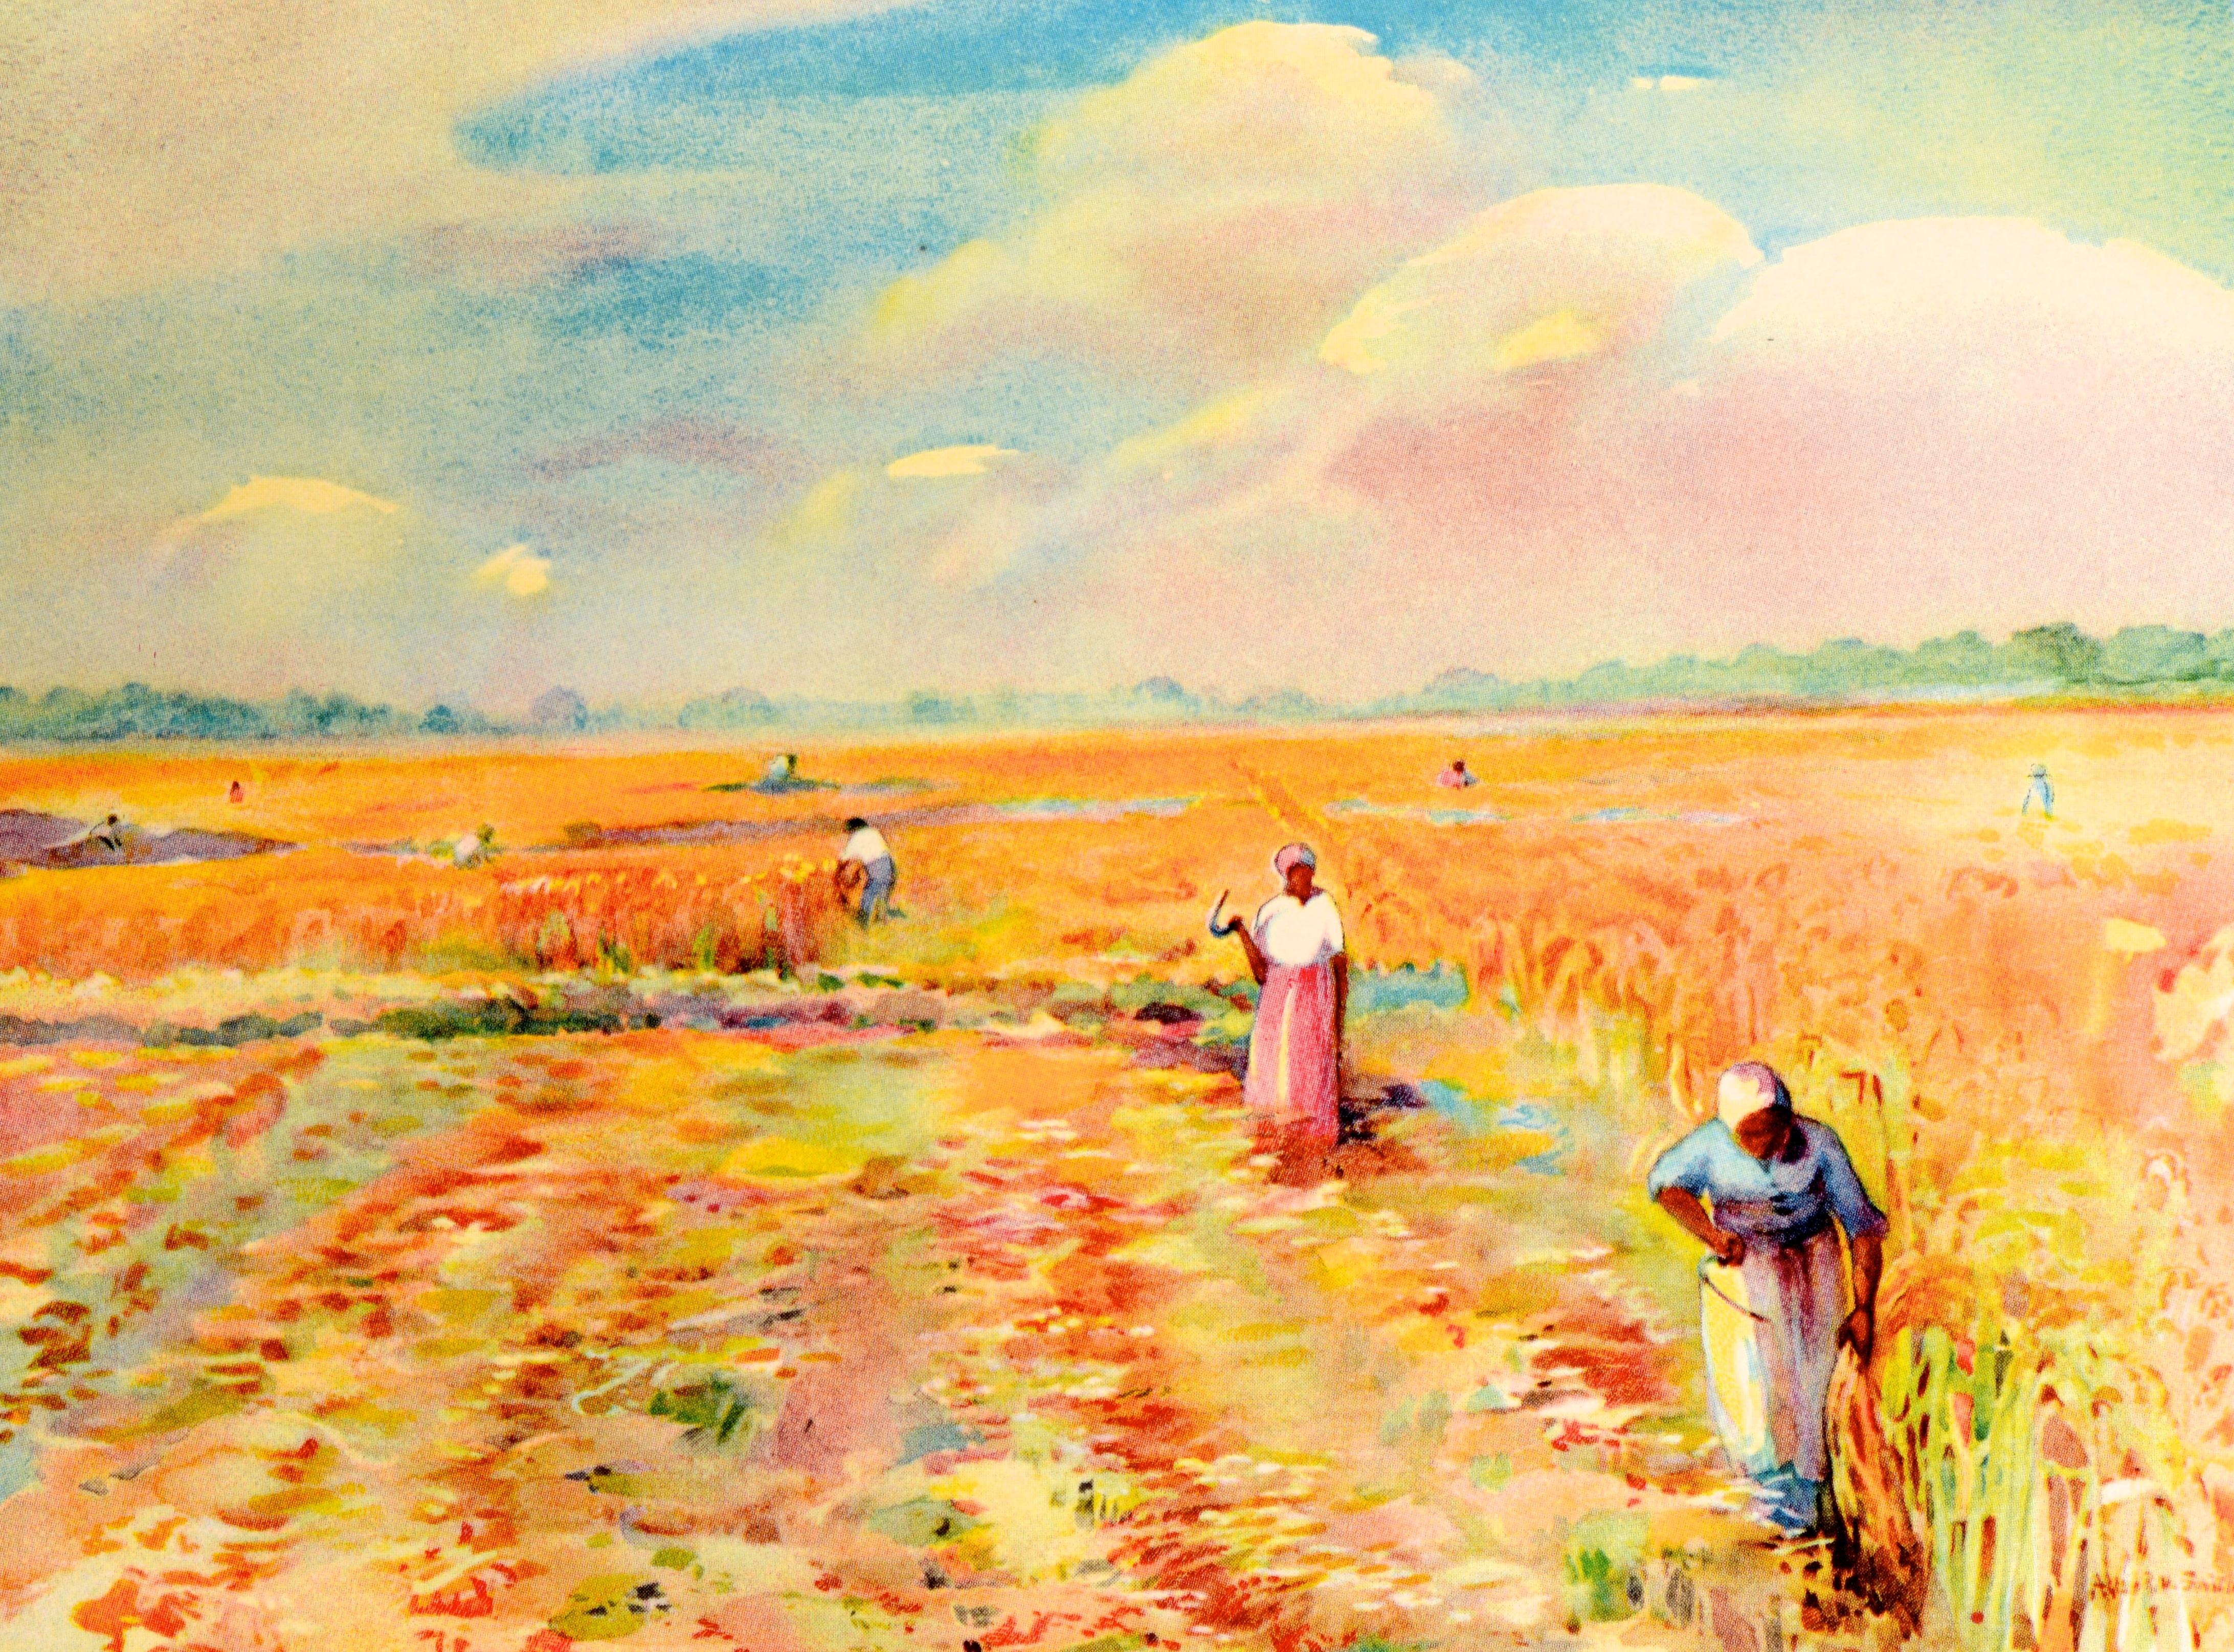 Paper Carolina Rice Plantation of the 50's Signed by the Illustrator, Publisher's Copy For Sale